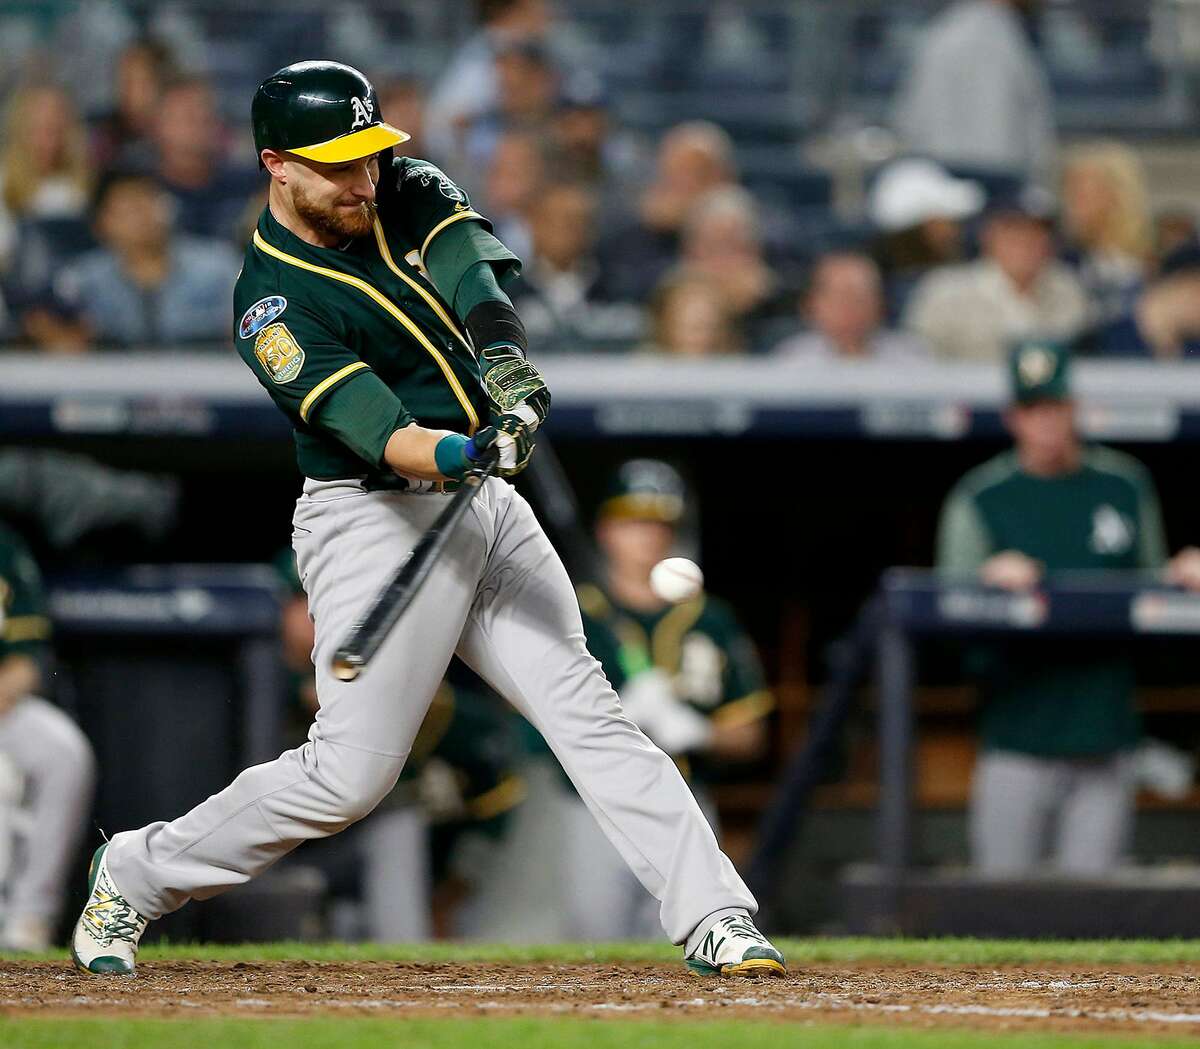 The Oakland Athletics' Jonathan Lucroy hits a single against the New York Yankees in the American League Wild Card game at Yankee Stadium in New York on October 3, 2018. Lucroy inked a one-year deal with the Los Angeles Angeles for the 2019 season. (Jane Tyska/Bay Area News Group/TNS)